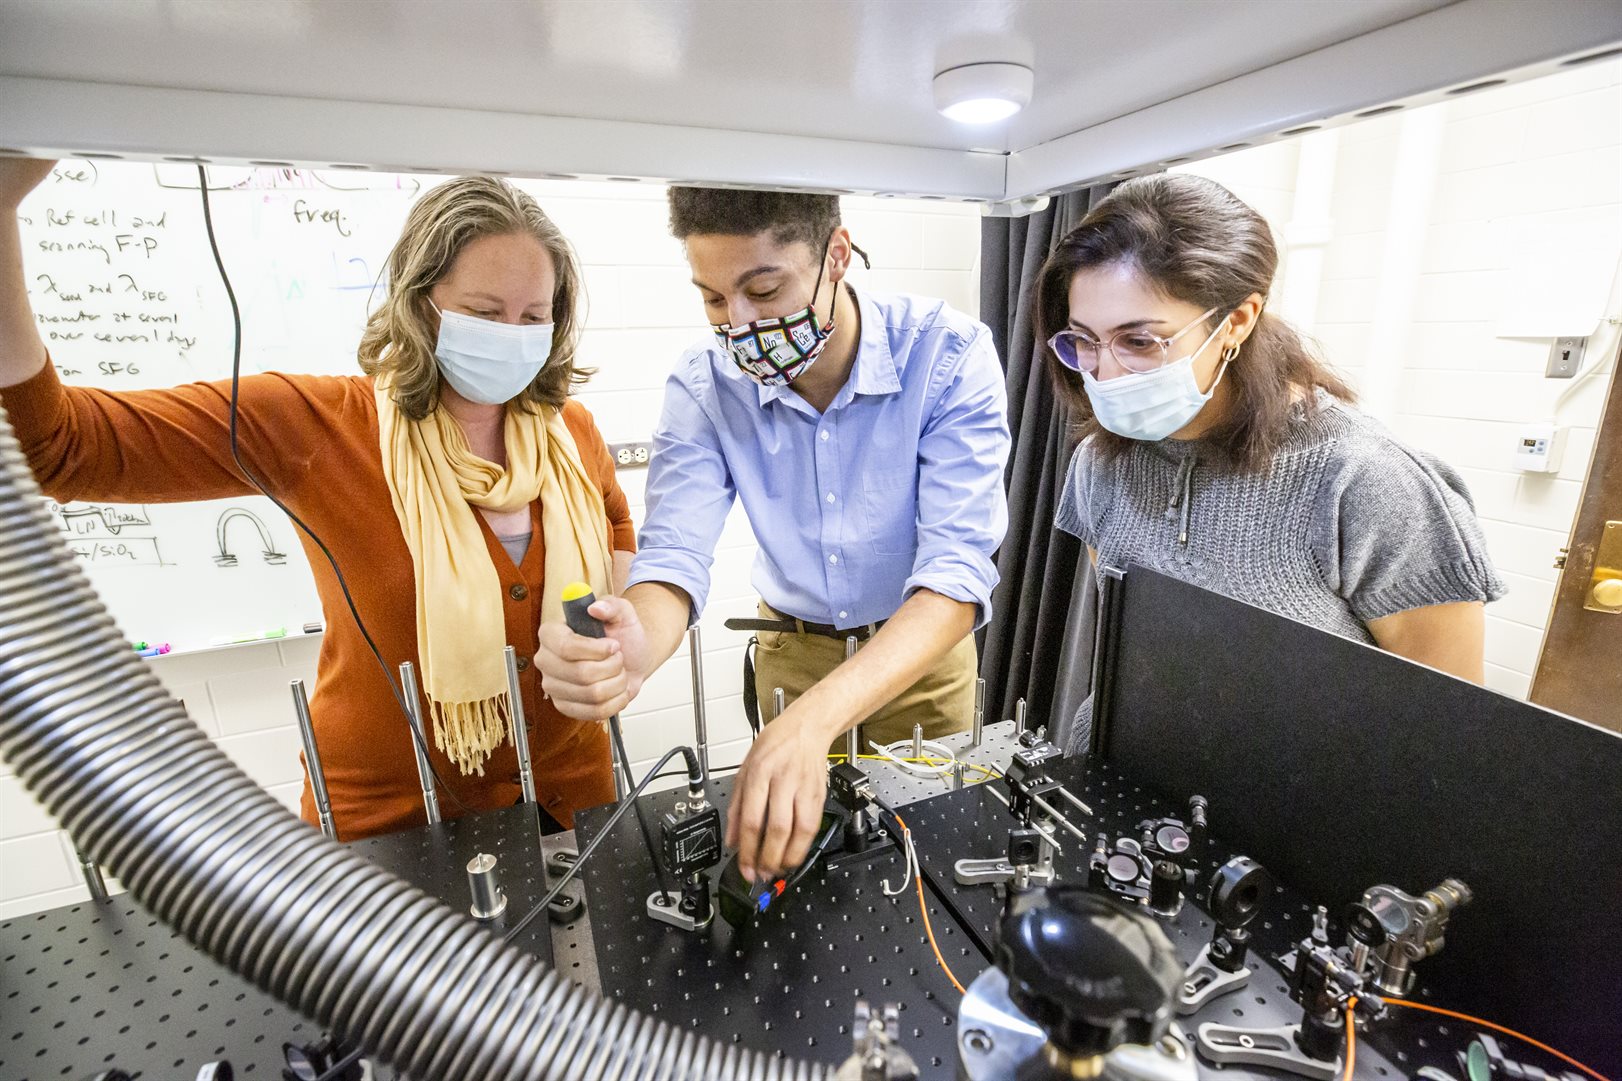 From left: Elizabeth Goldschmidt, graduate student Donny Pearson and postdoctoral fellow Safura Sharifi work on an experimental setup in Goldschmidt&rsquo;s lab at UIUC. Photo: L. Brian Stauffer, UIUC